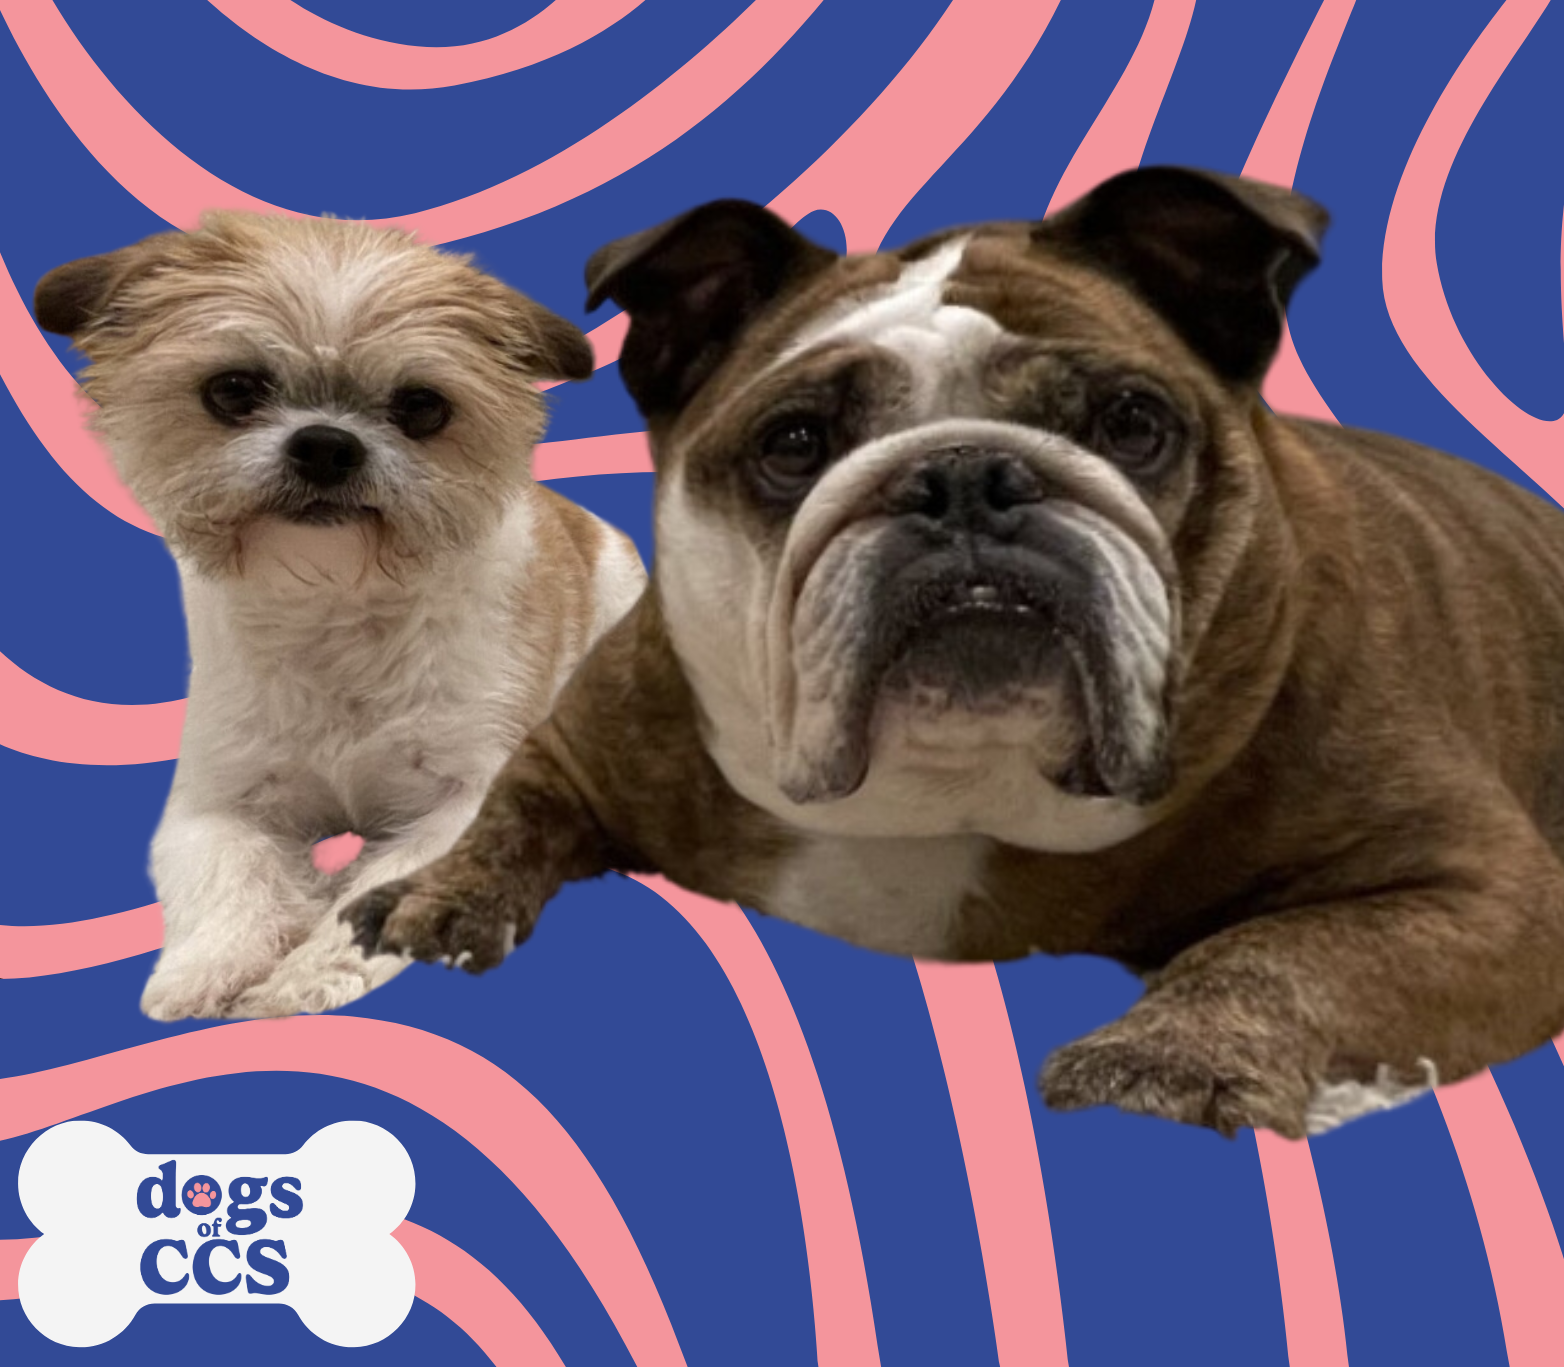 Bella and Lilo, Counseling and Consultation Services' dogs, imposed over a swirling pink and blue background